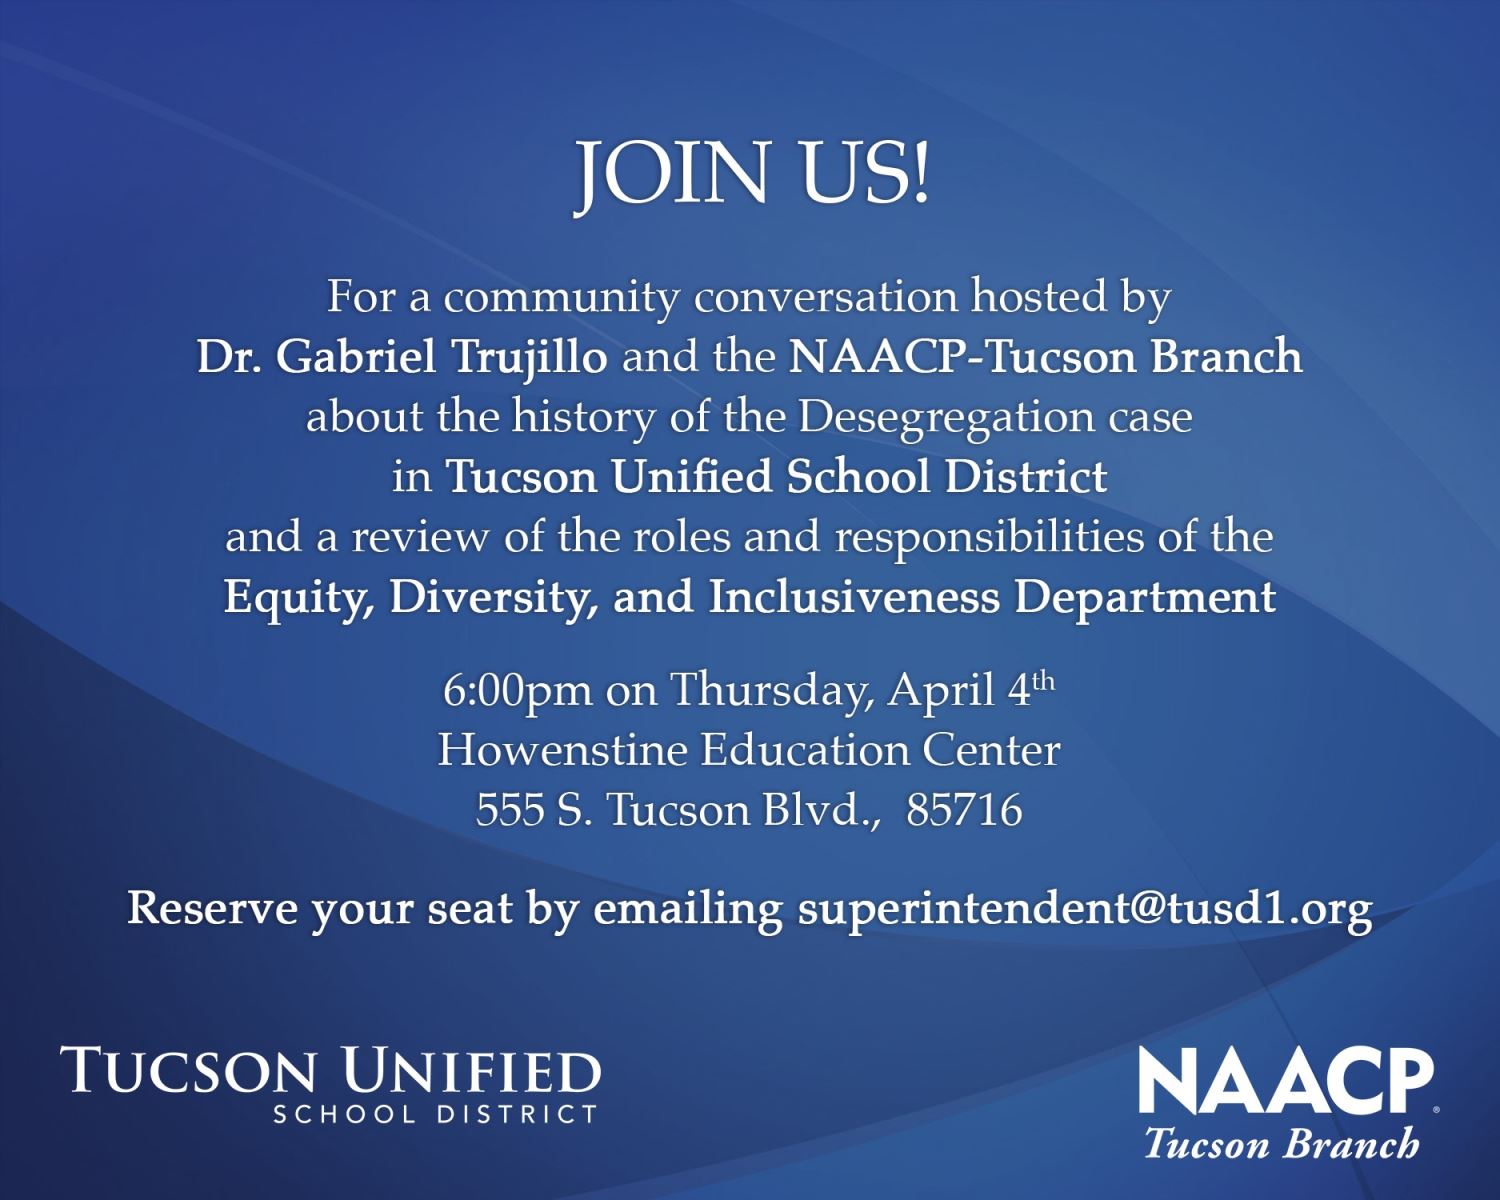 Join us for a community conversation hosted by Dr. Gabriel Trujillo and the NAACP-߲о Branch about the history of the Desegregation case in ߲о Unified School District and a review of the roles and responsibilities of the Equity, Diversity and Inclusiveness Department. Thursday, April 4 | 6 pm | Howenstine Education Center | 555 S. ߲о Blvd., 85716  Reserve your seat by email.